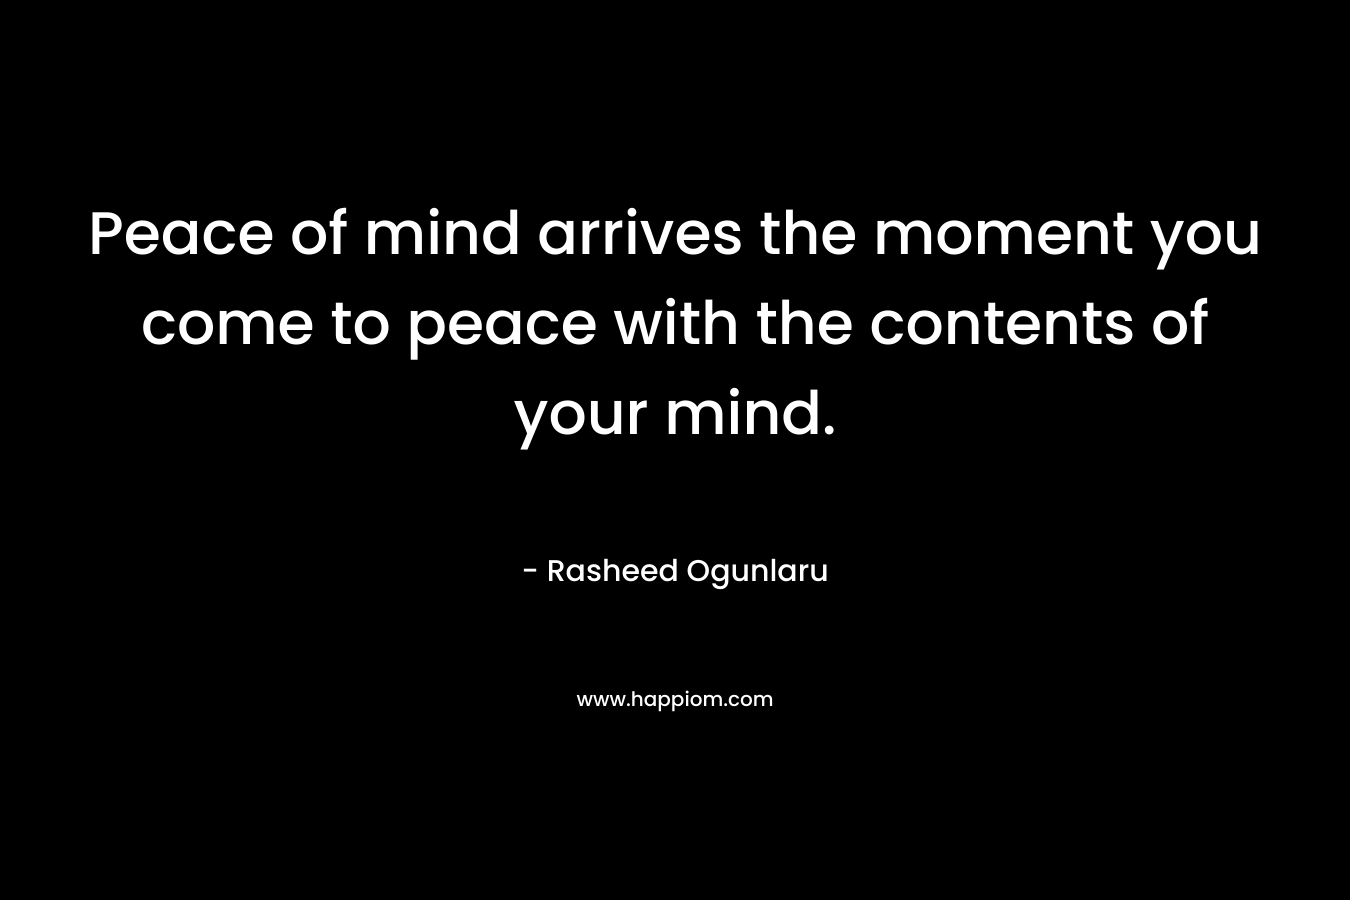 Peace of mind arrives the moment you come to peace with the contents of your mind. – Rasheed Ogunlaru